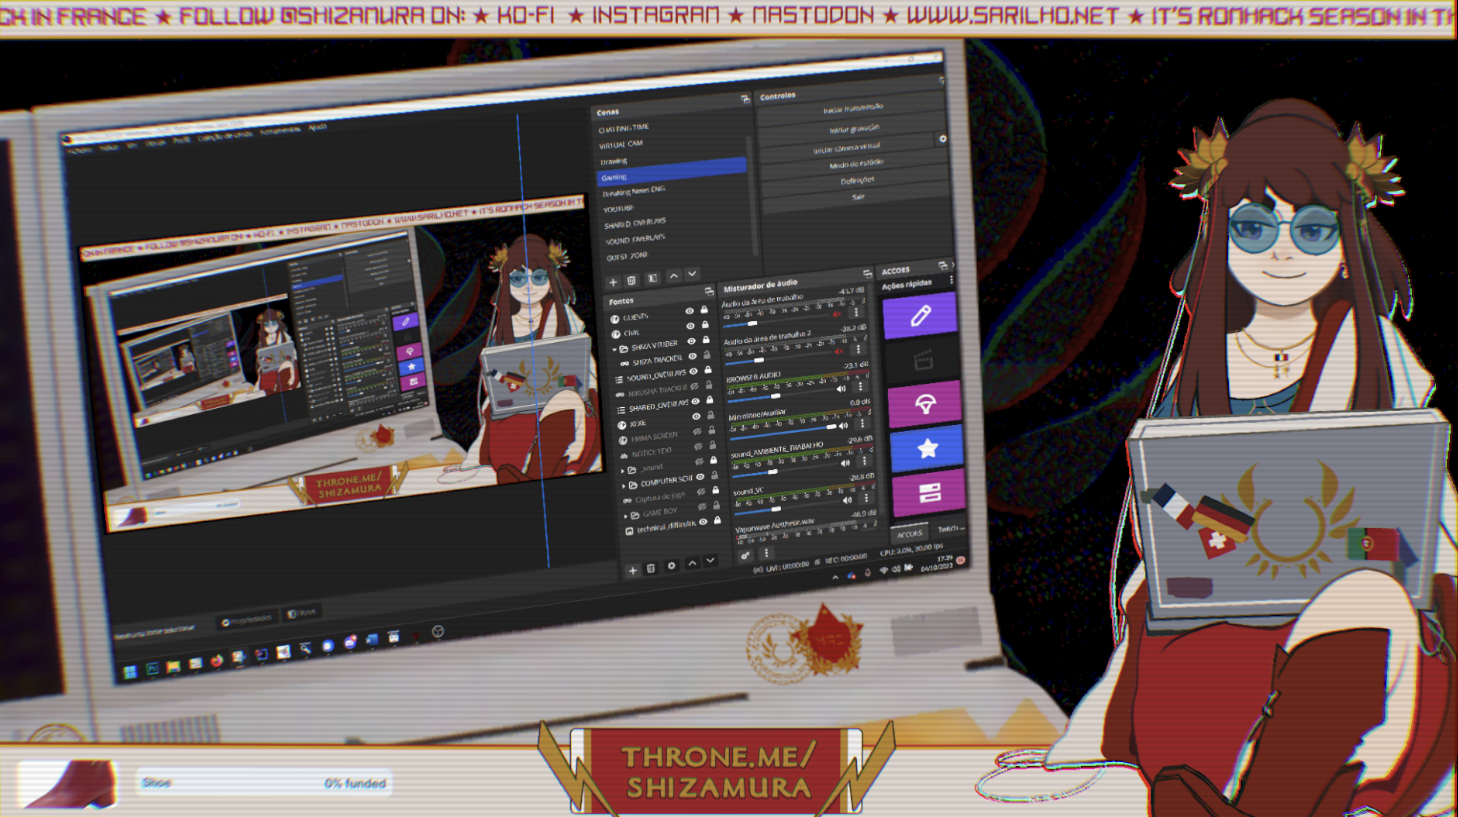 Shizamura is now LIVE on twitch! This is just an ad.